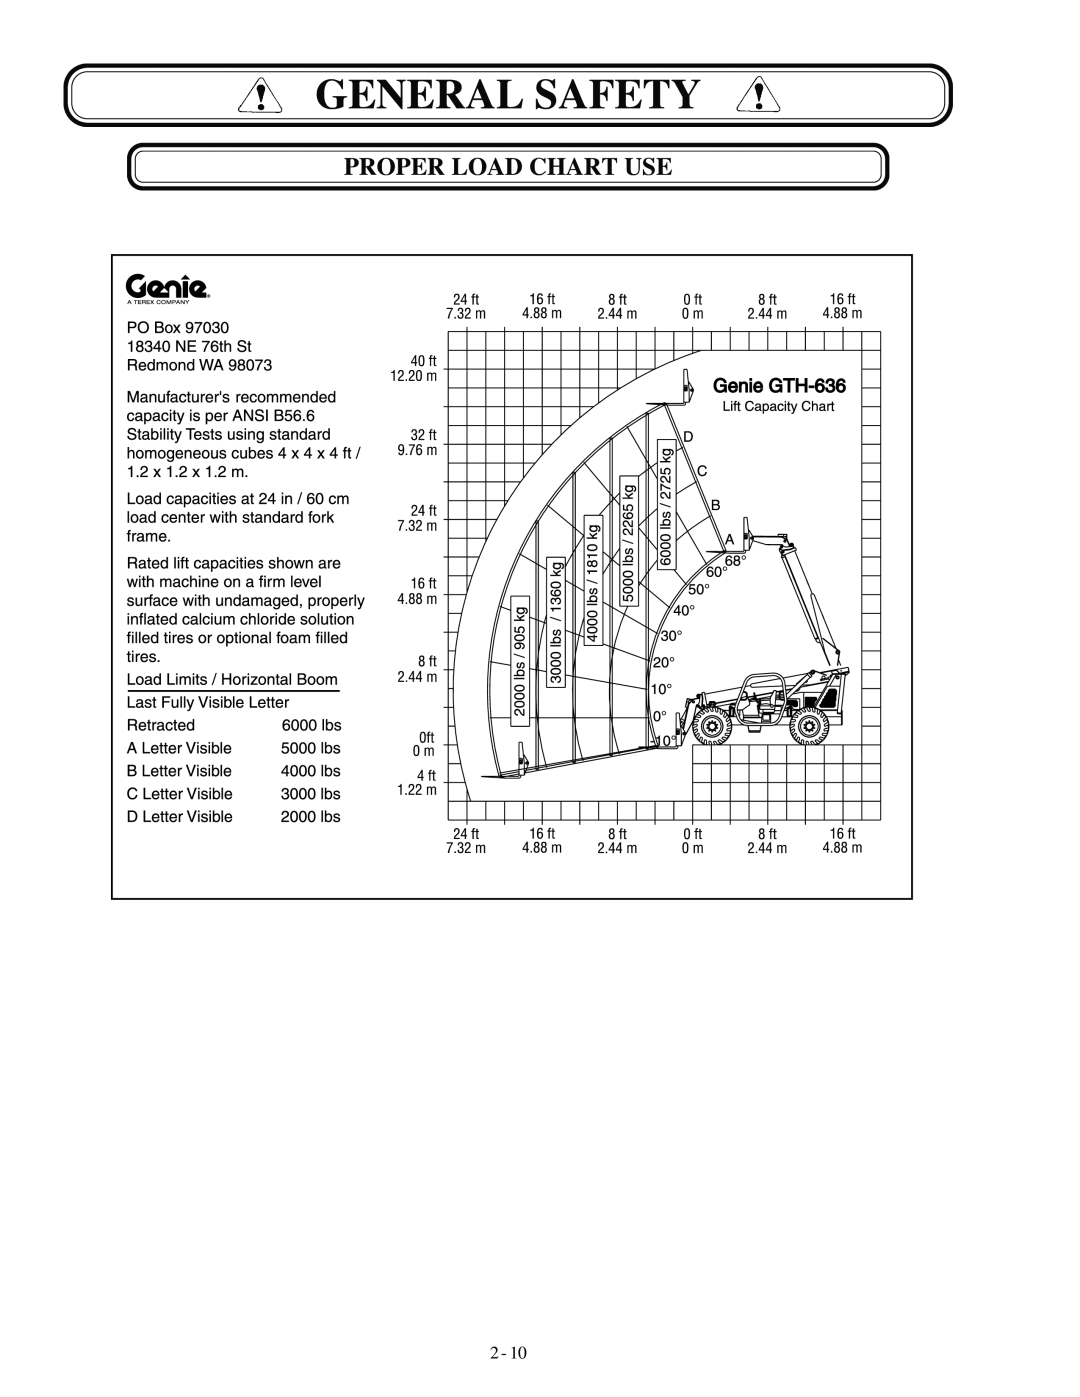 Genie GTH-636 manual General Safety, Proper Load Chart Use 